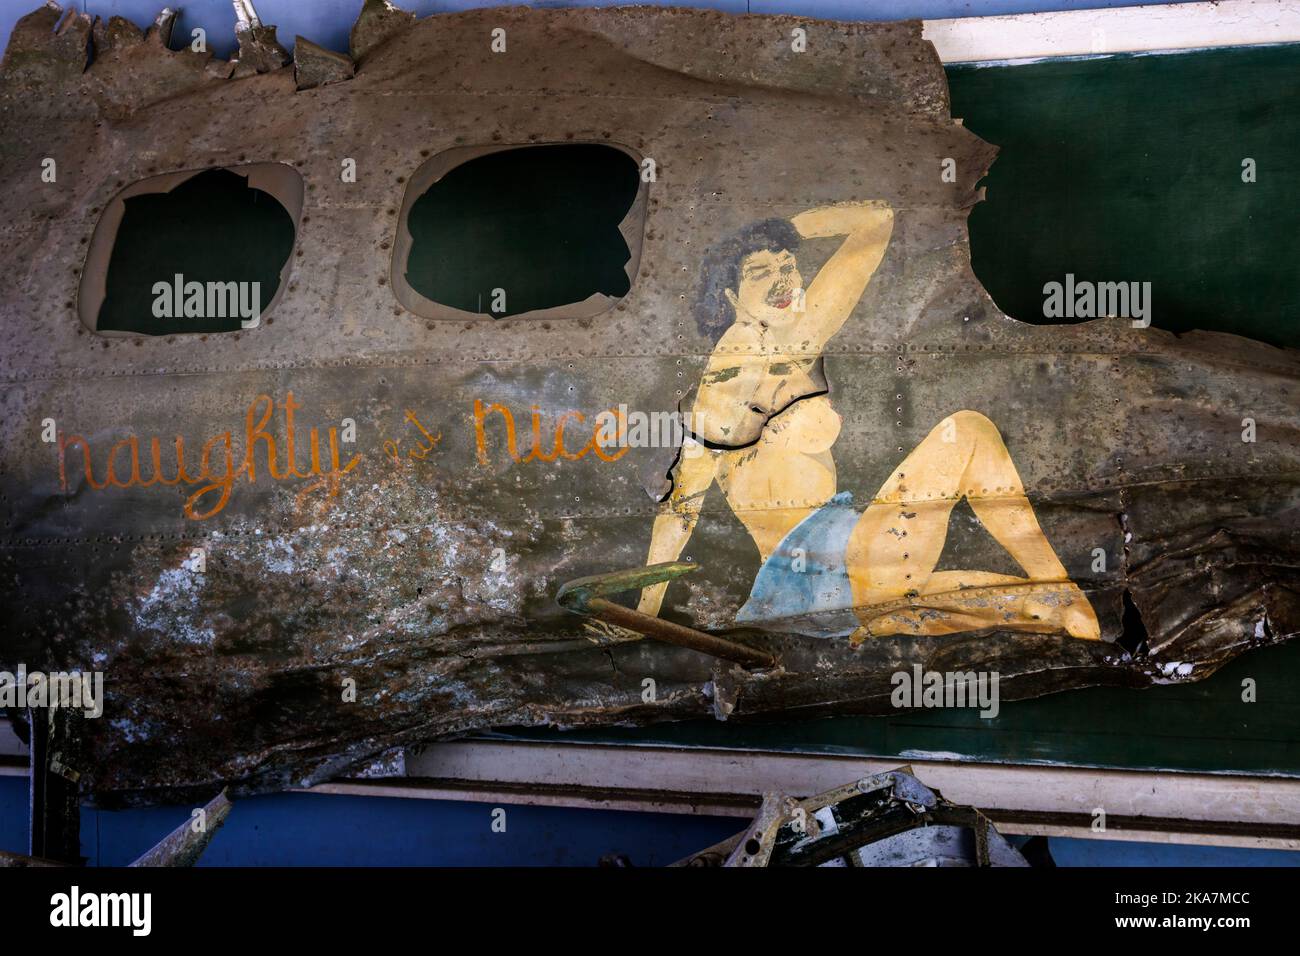 Panel from wreckage of B17 bomber displaying nose art Naughty but Nice with painted lady.  Kokopo War Museum, Kokopo Papua New Guinea Stock Photo